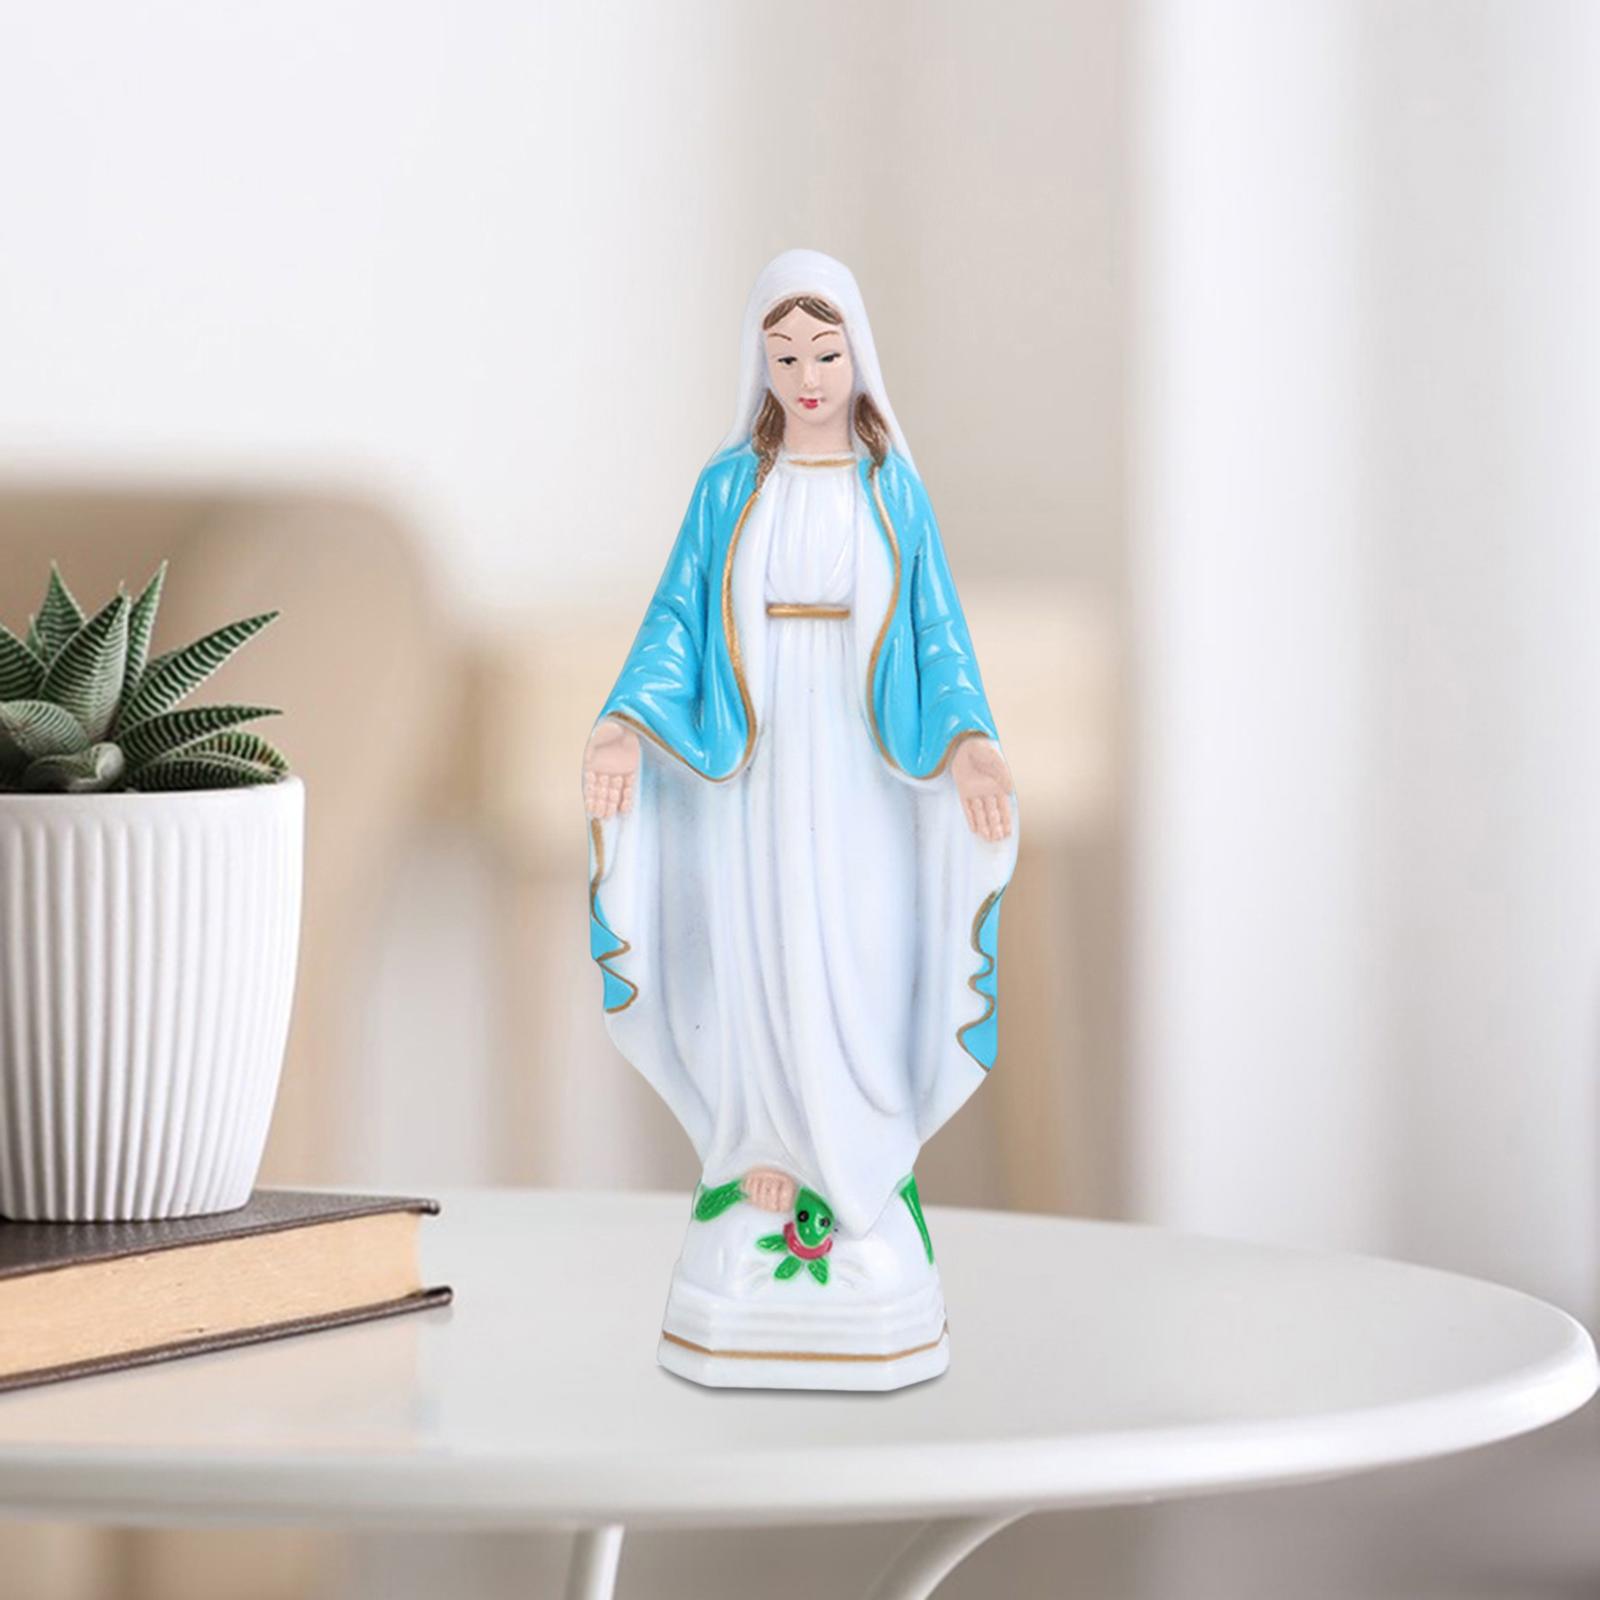 Blessed Virgin Mary Figurine Character Sculpture Statue Decoration 15cm Blue Coat